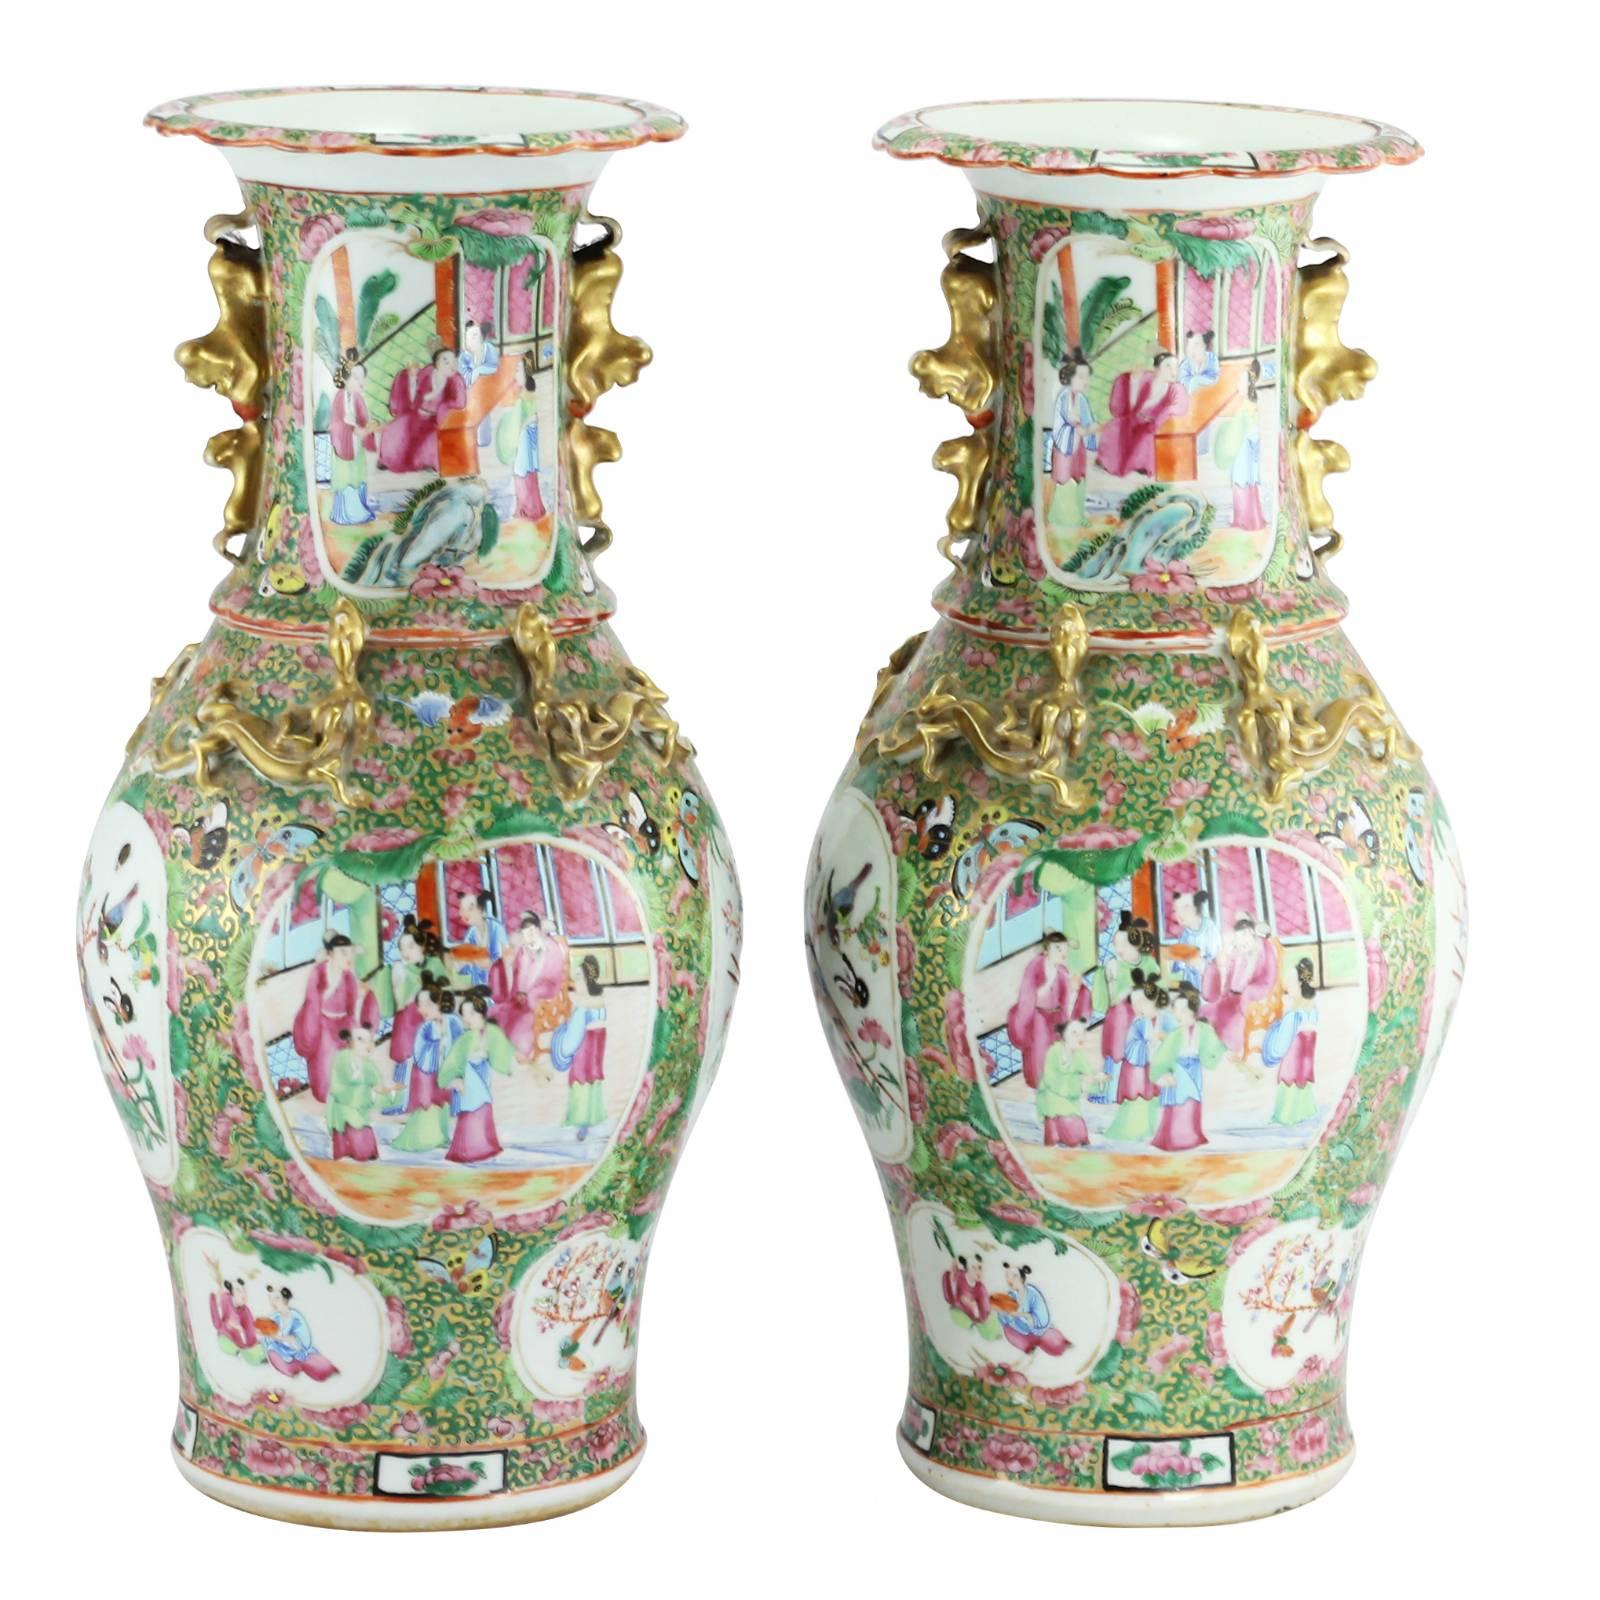 A pair of late 19th century Chinese Qing Dynasty famille rose vases. On each vase, the baluster shaped body features four main panels, alternating between scenes of birds, insects, and flora; and scenes of people in a pavillion. A similar